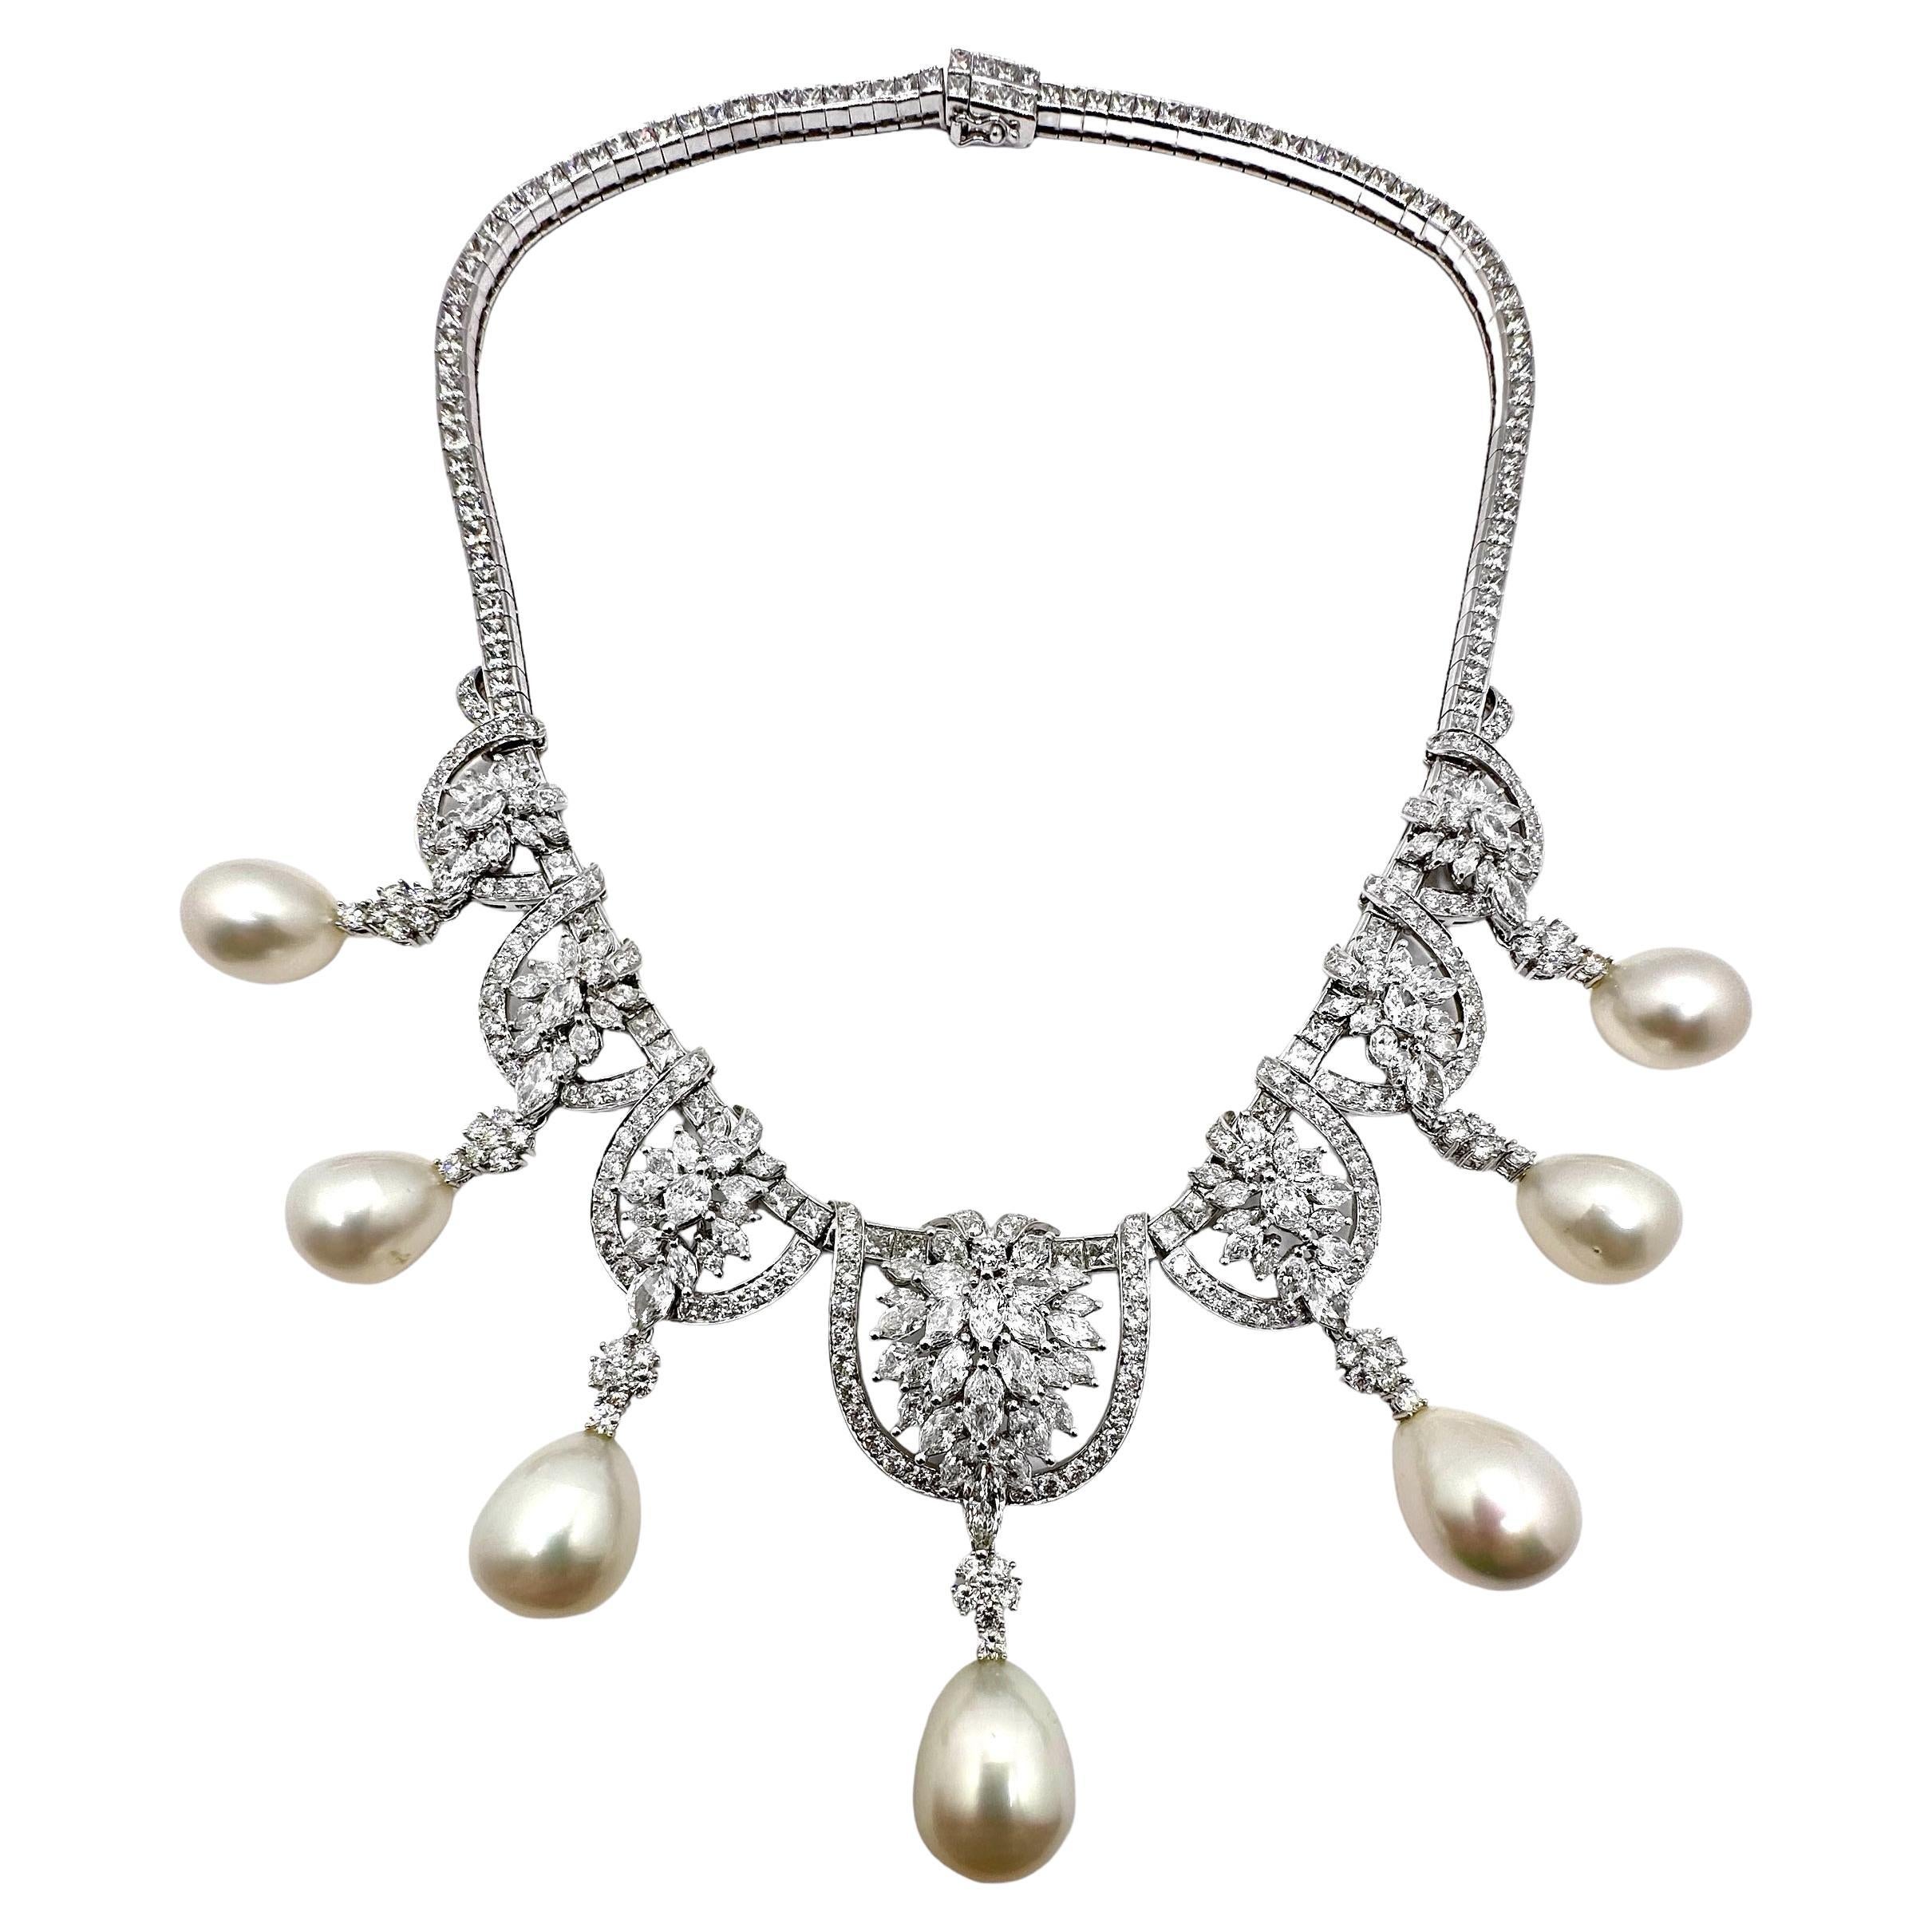 This amazing platinum cocktail necklace is replete with assorted round brilliant cut, marquise cut, and princess cut diamonds. At the end of each of the seven stations in the front, are removable south sea pearl and diamond hangers. The hangers are